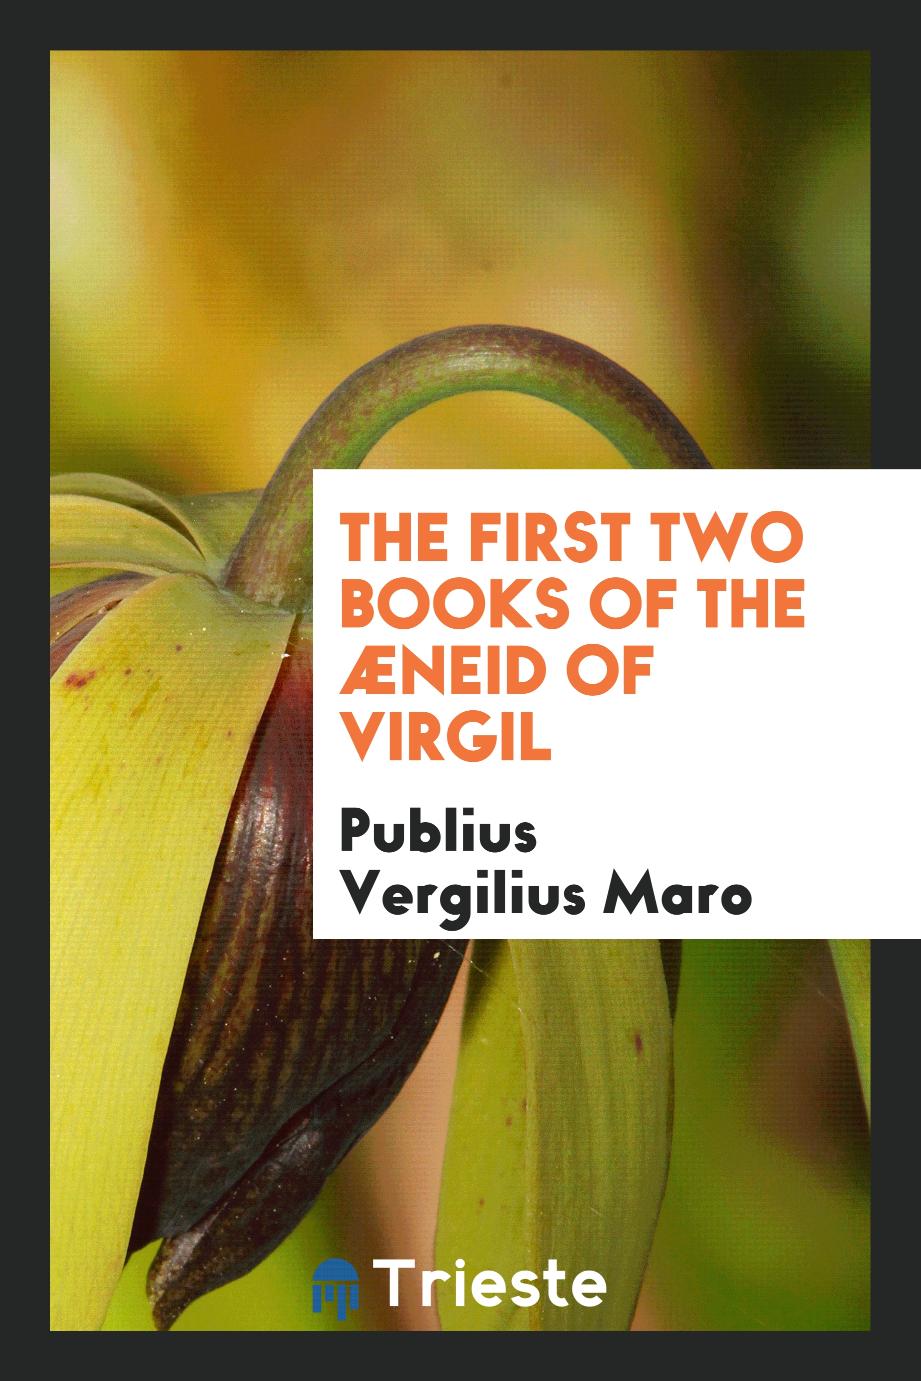 The First Two Books of the Æneid of Virgil